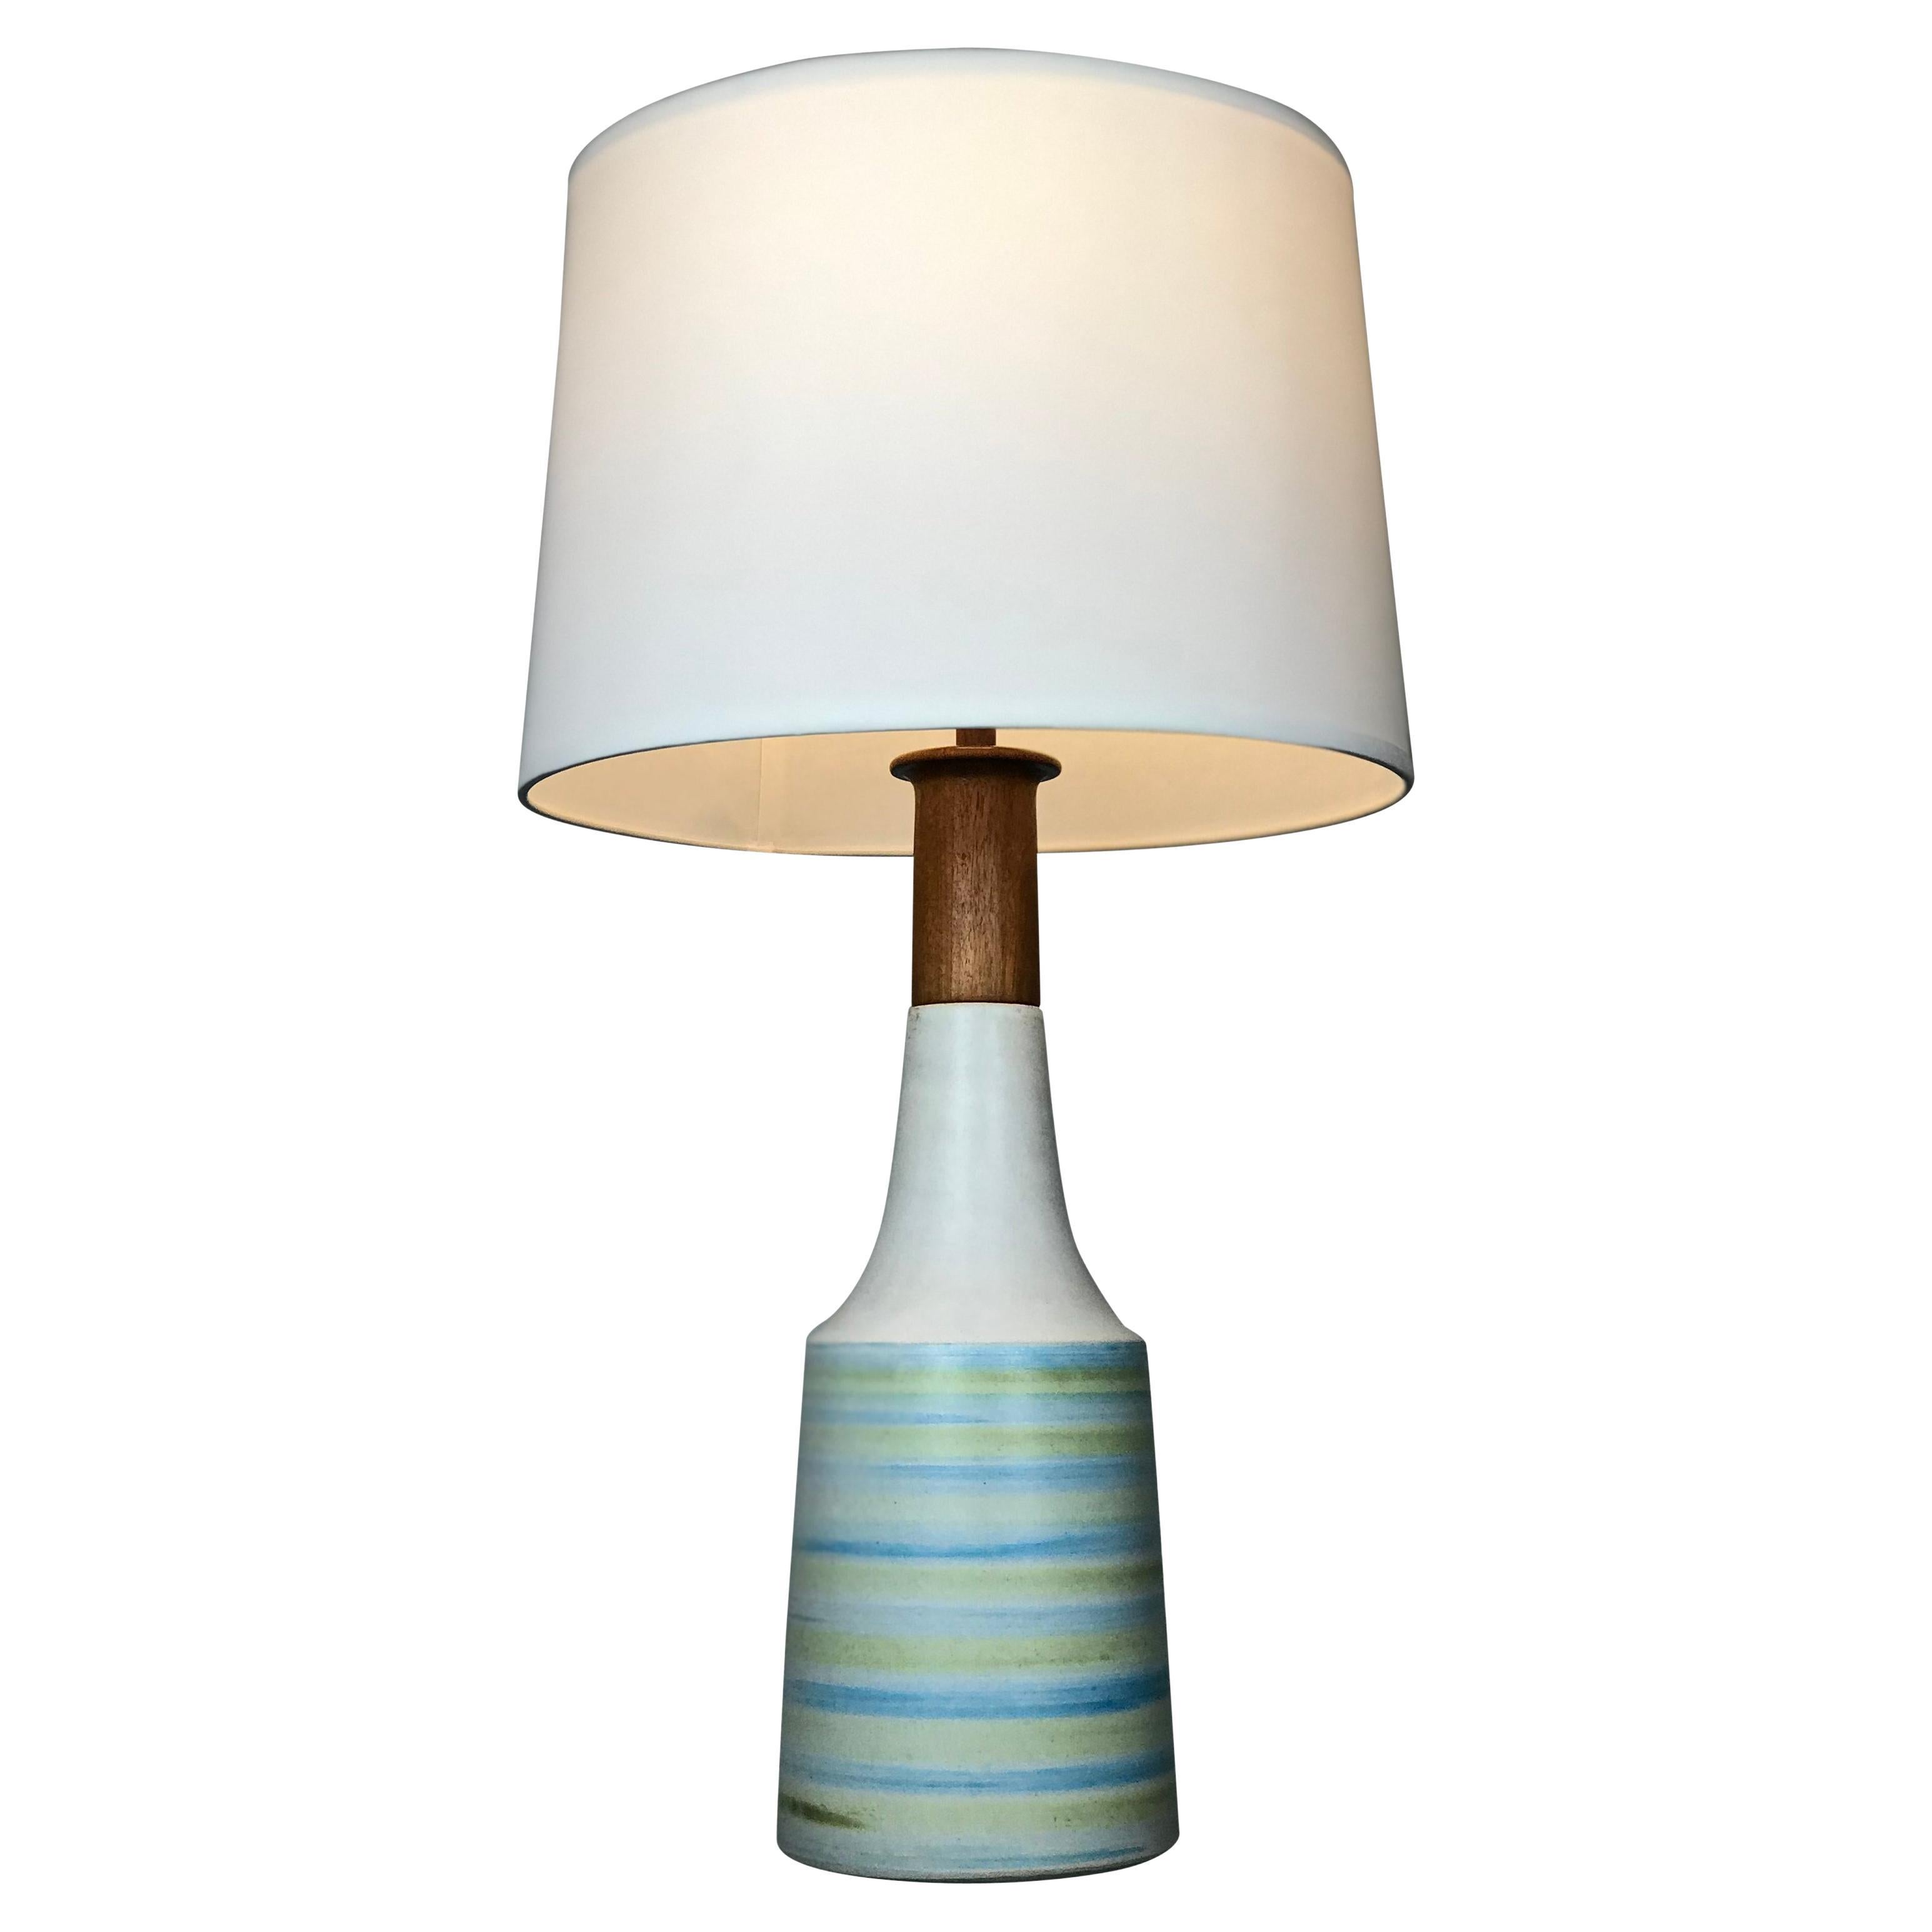 Impressive large Martz walnut and stoneware lamp with wisps of blue and green against a matte grey glaze.
Rewired - new antique finish socket with a white cord. 
*Shade is not included but it fits so well. The dimensions of the shade are: 12